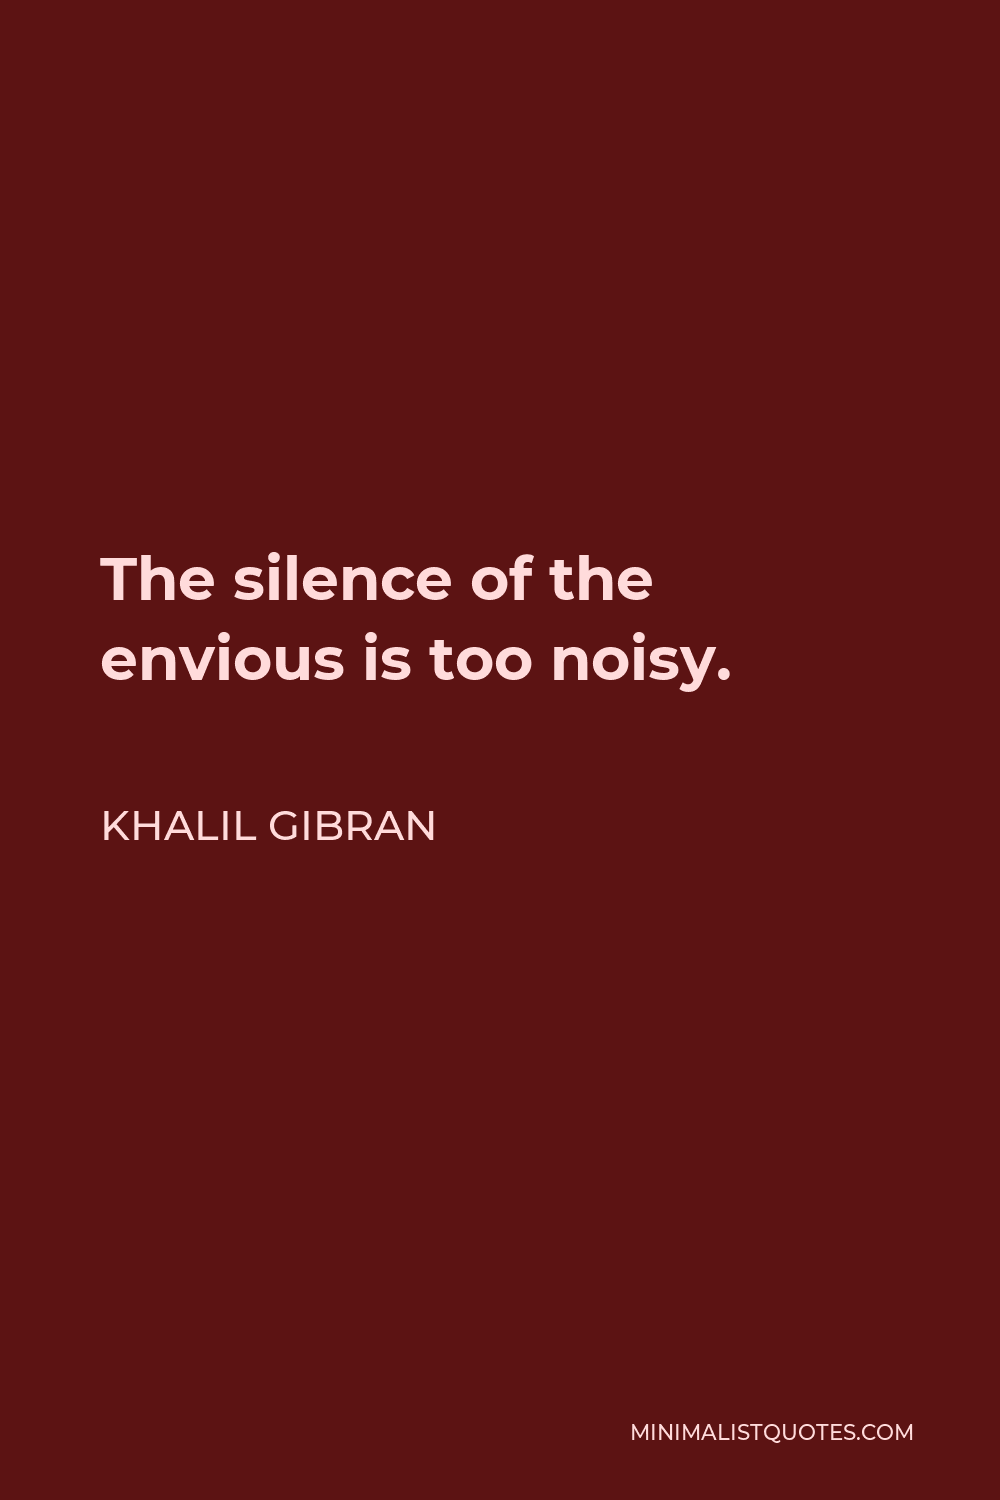 Khalil Gibran Quote - The silence of the envious is too noisy.